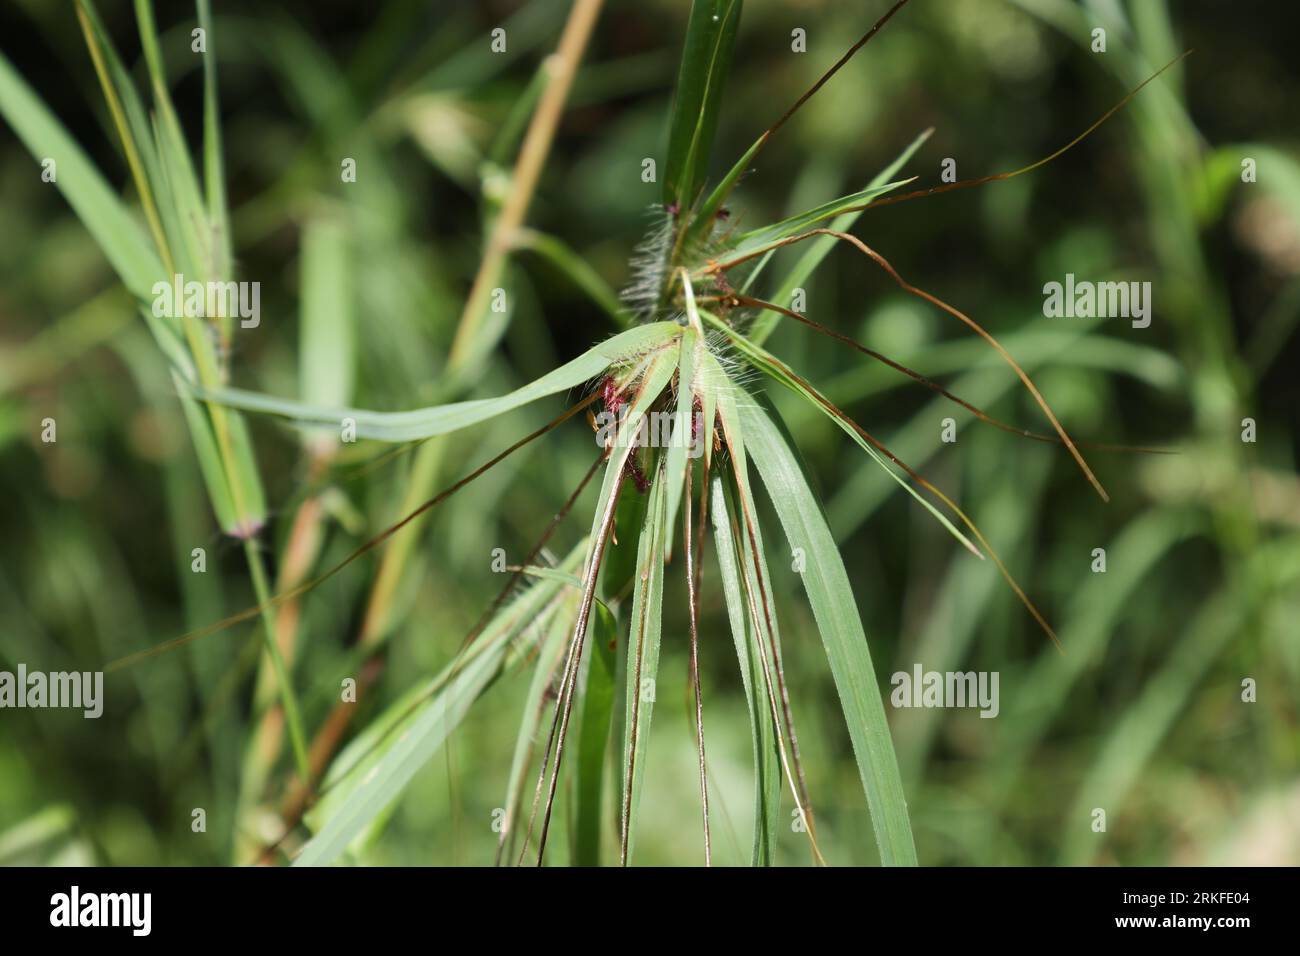 Close up view of an inflorescence with seeds of a Heteropogon Contortus Ayurvedic plant Stock Photo